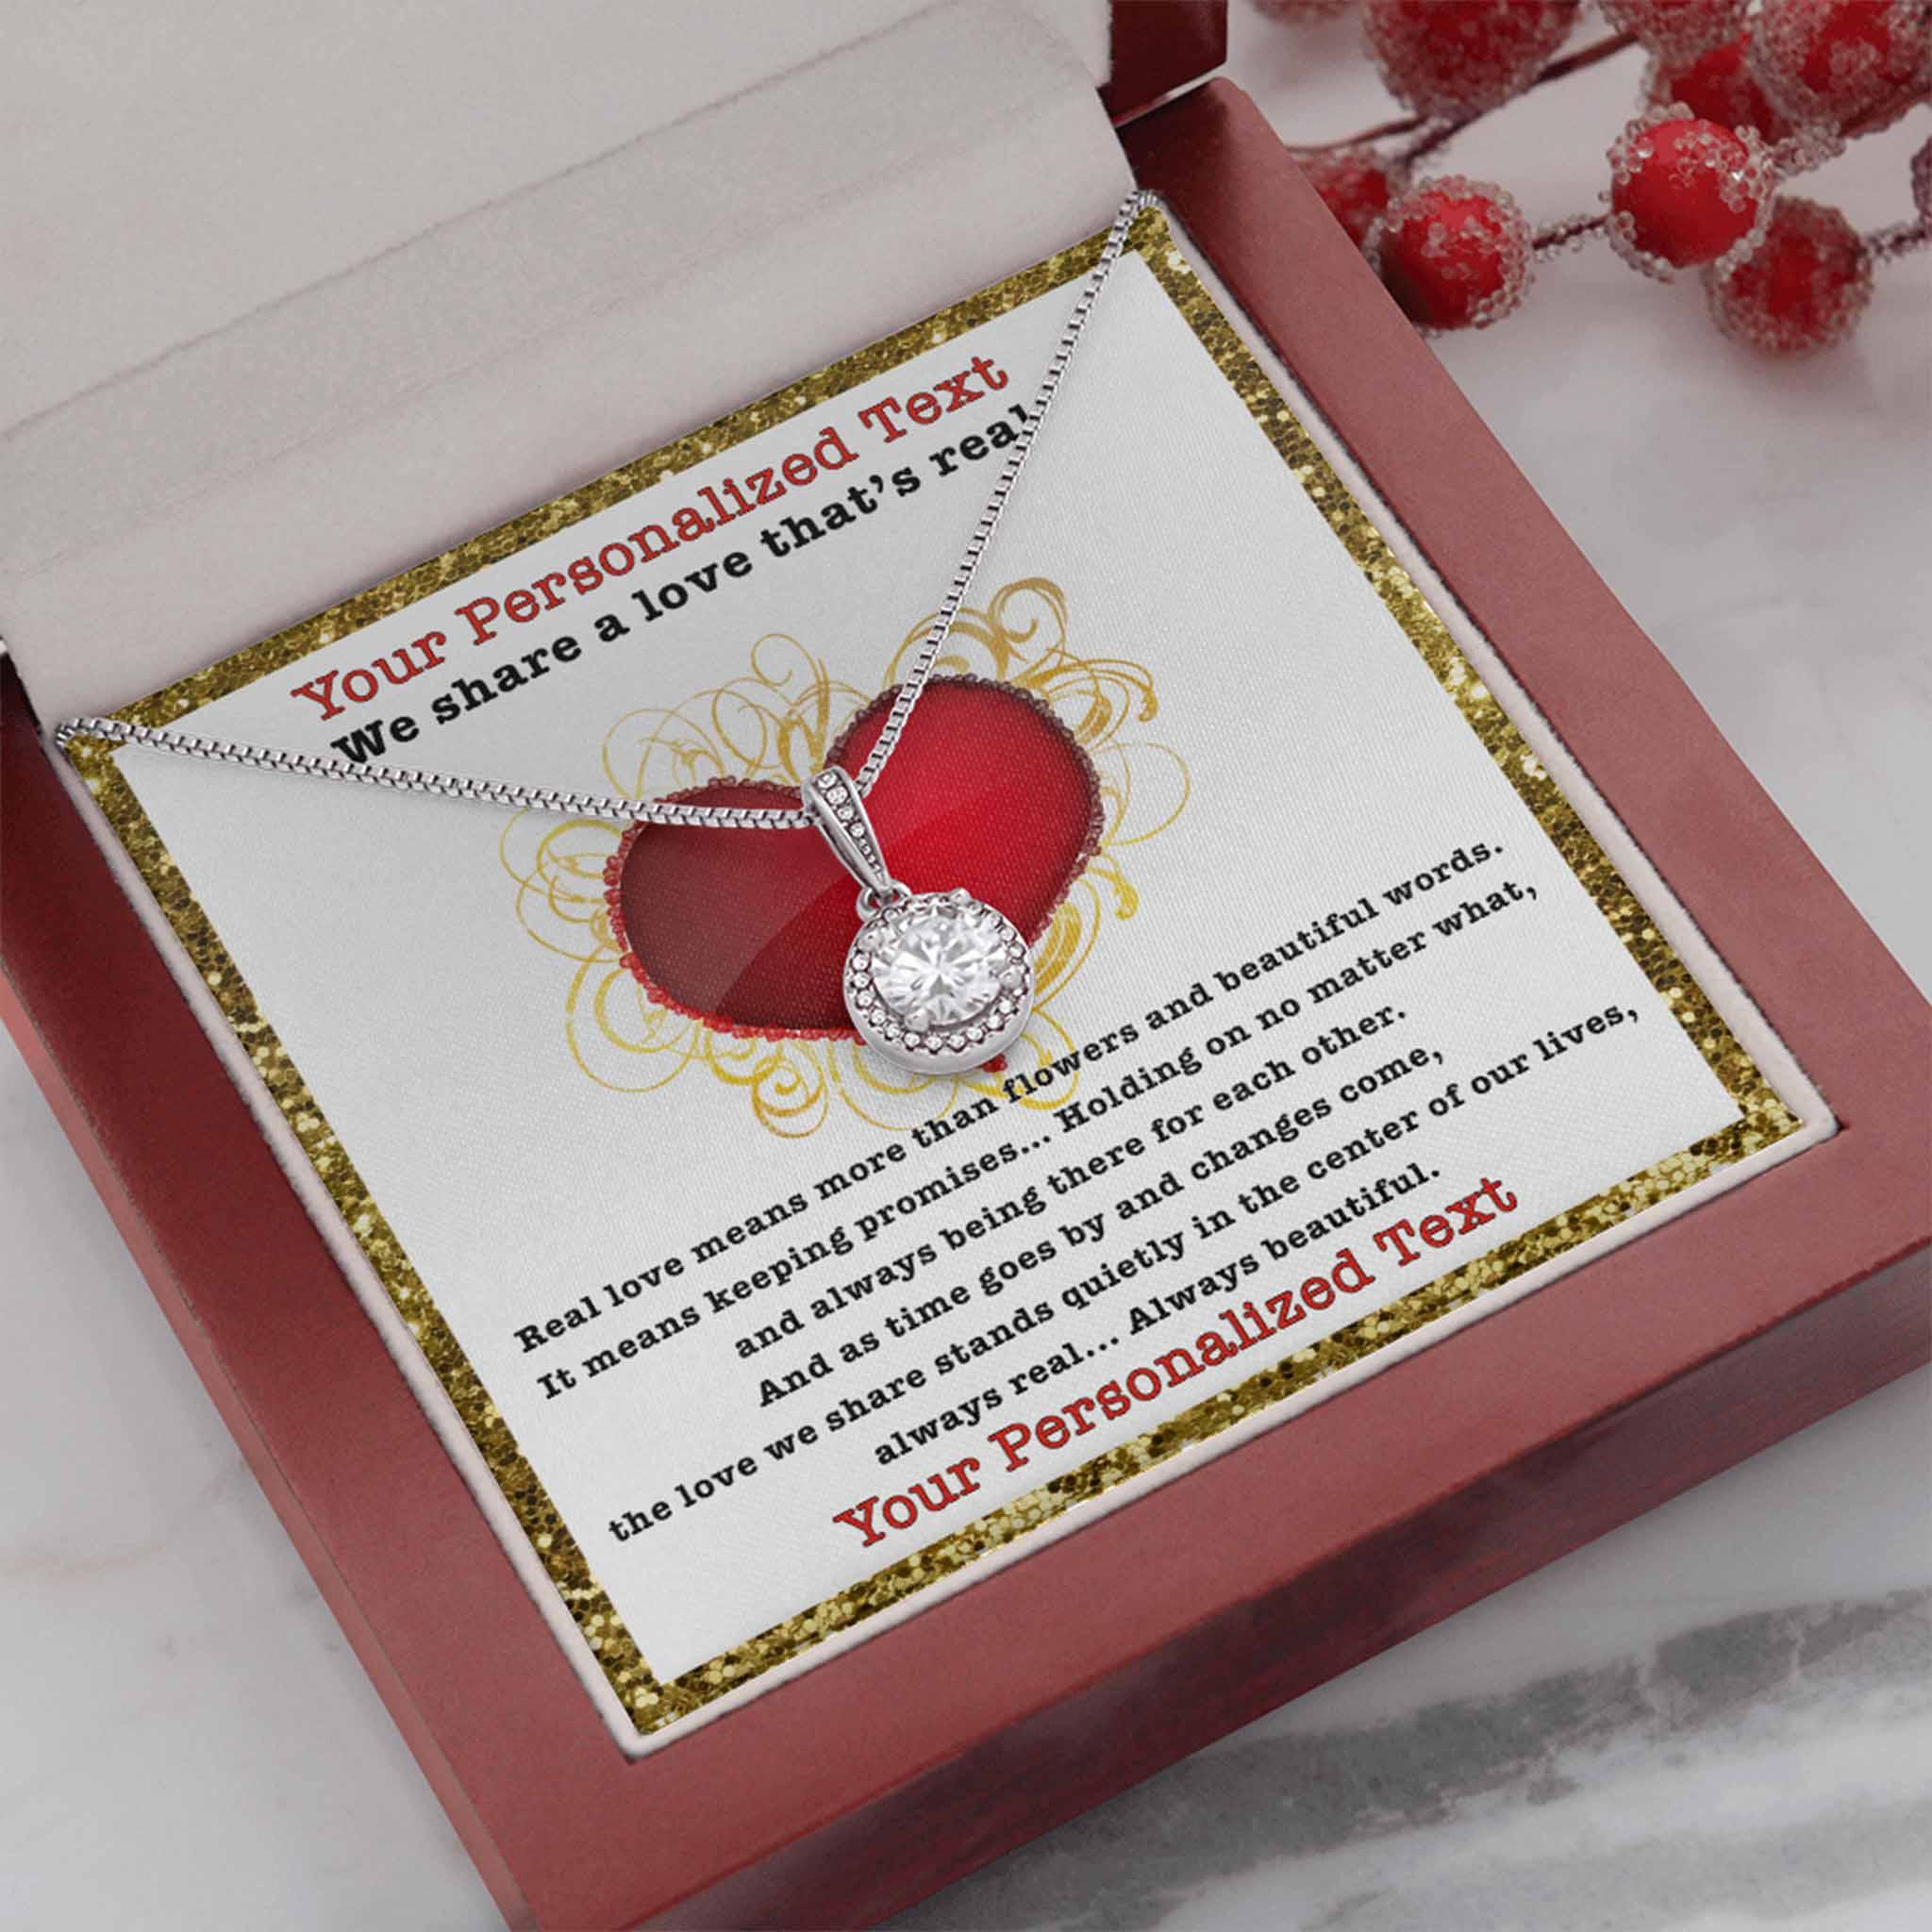 Eternal Hope Necklace We Share A Love Personalized Insert CardCustomly Gifts